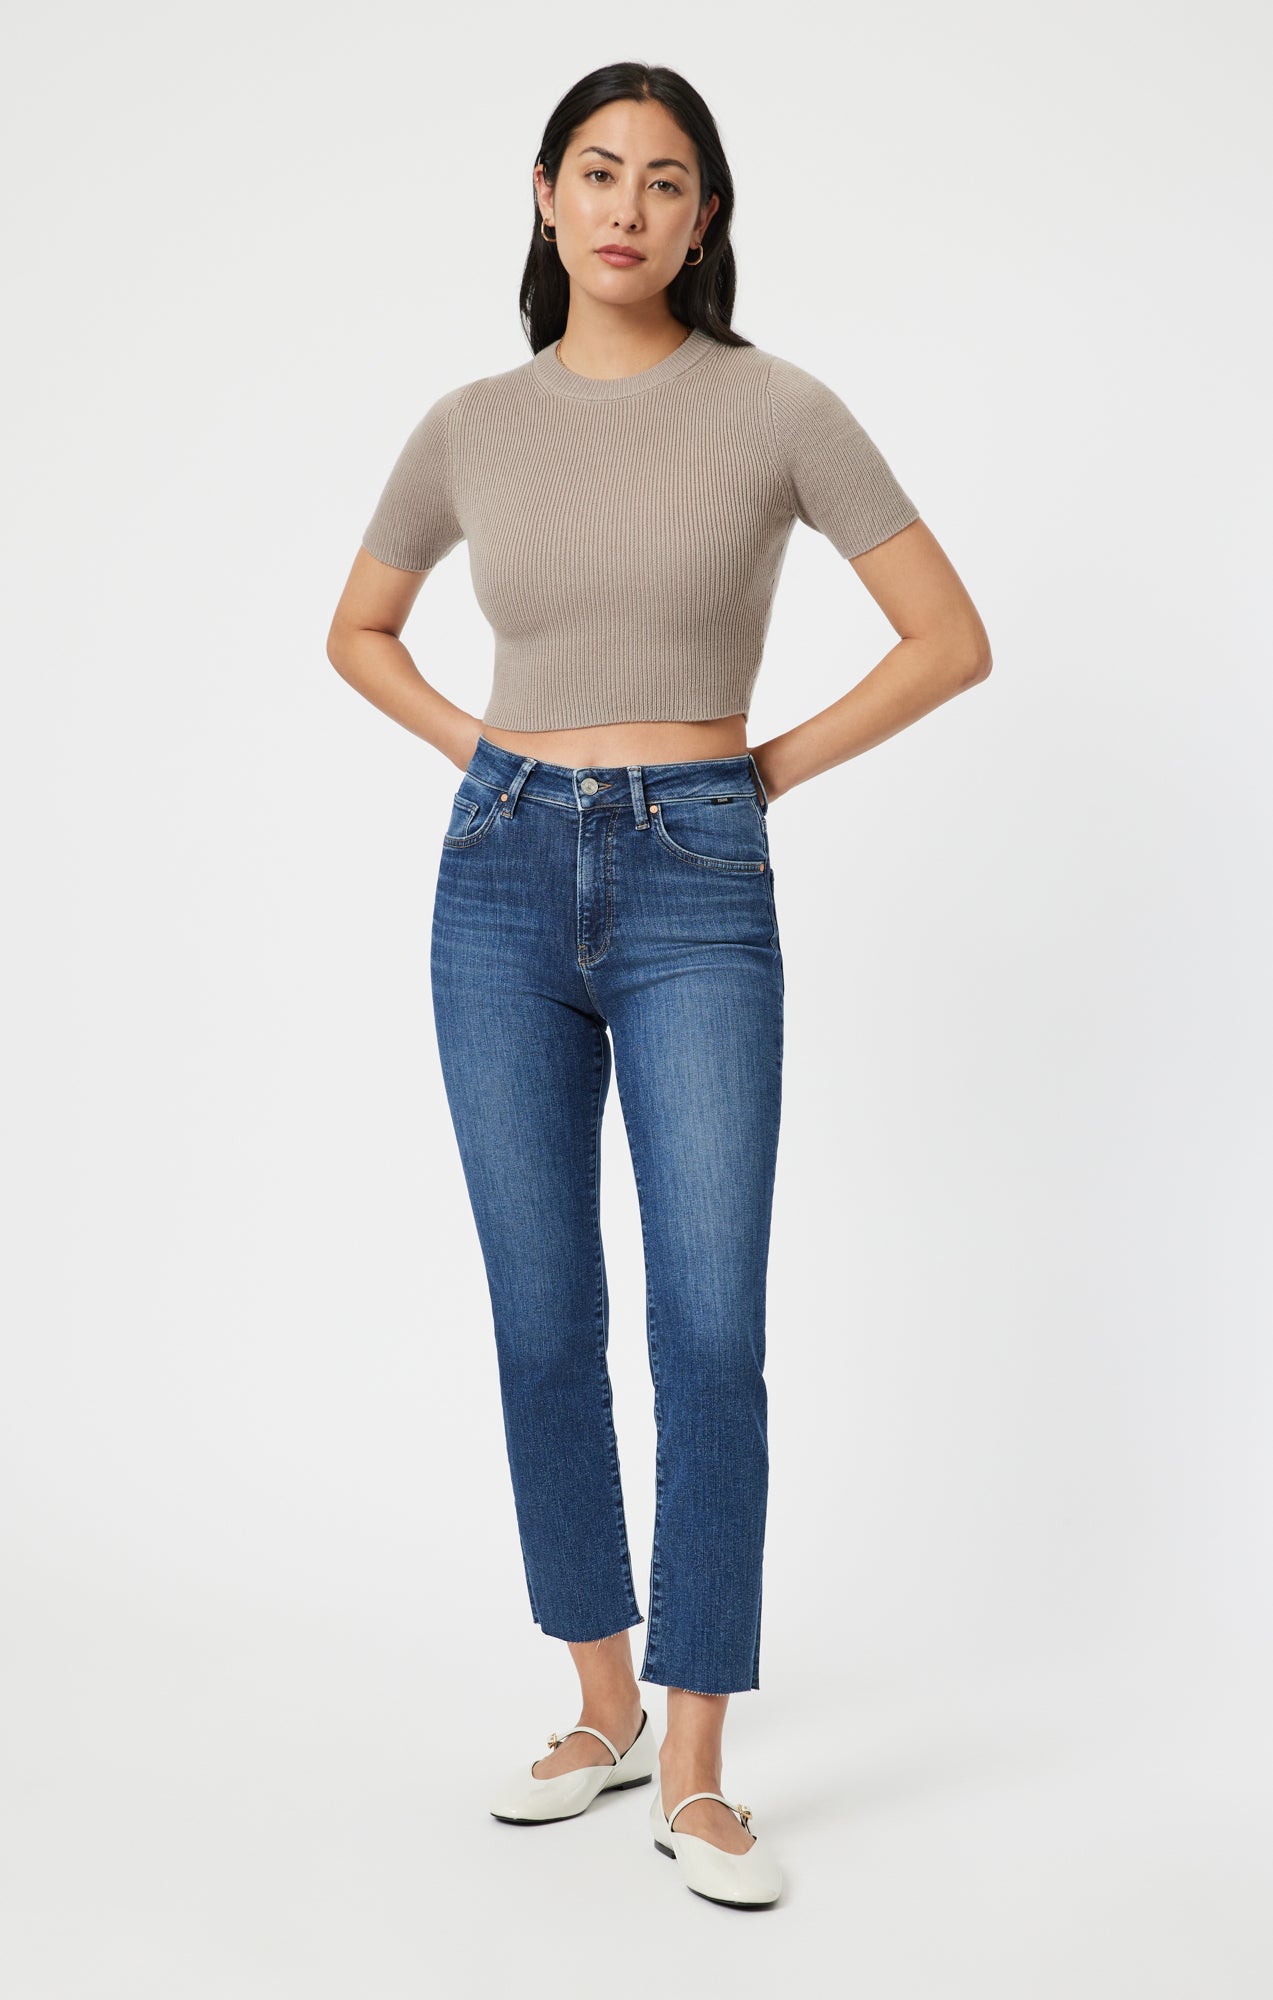 High Rise Jeans for Women, Womens High Rise Jeans